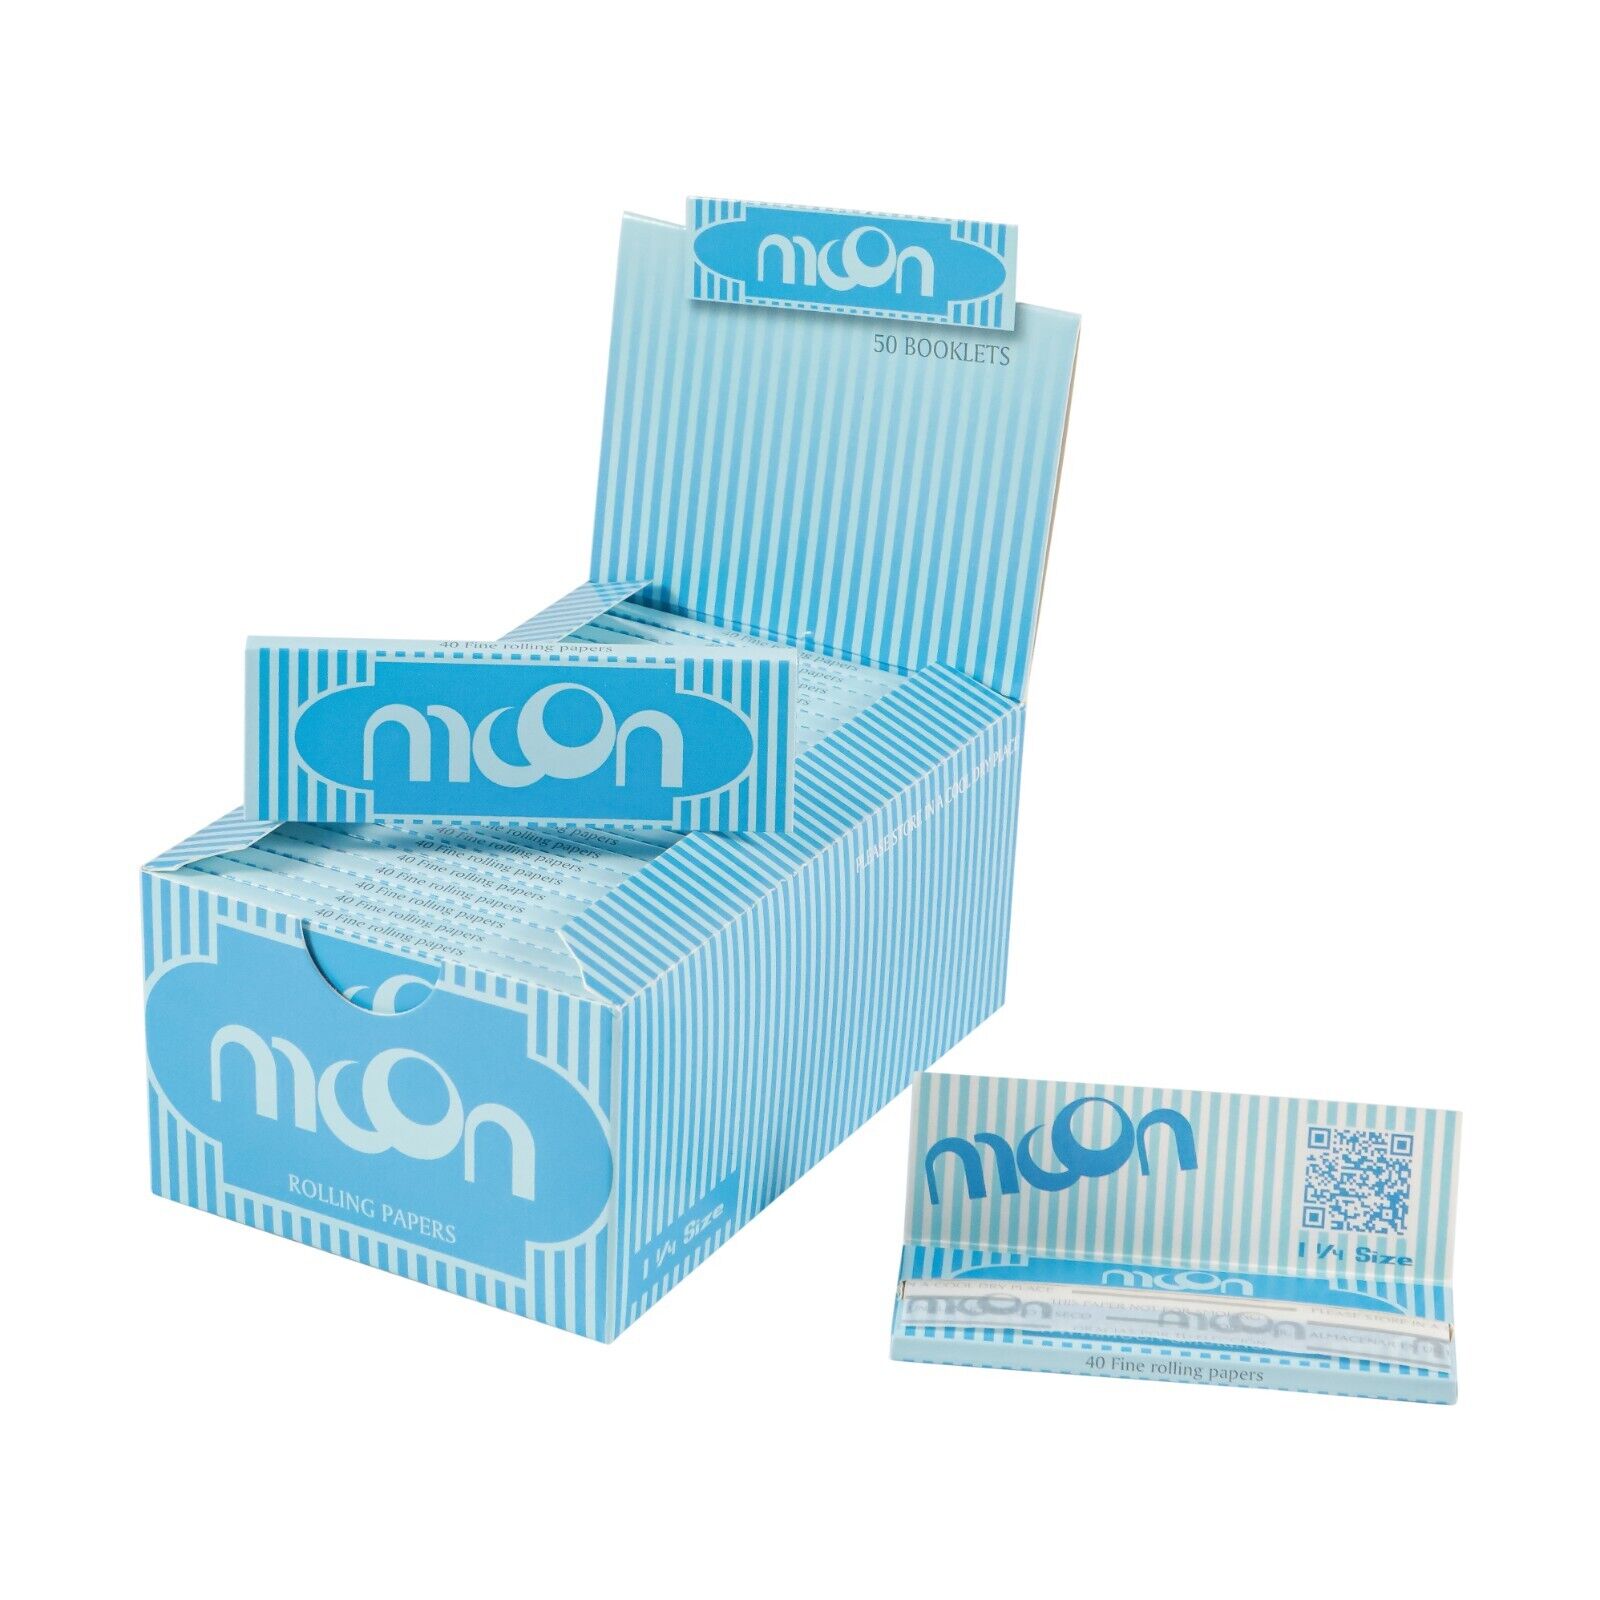 MOON 50 Booklets Rice Rolling Papers 1 1/4 Size 1.25 inch 77 mm Cigarette Paper